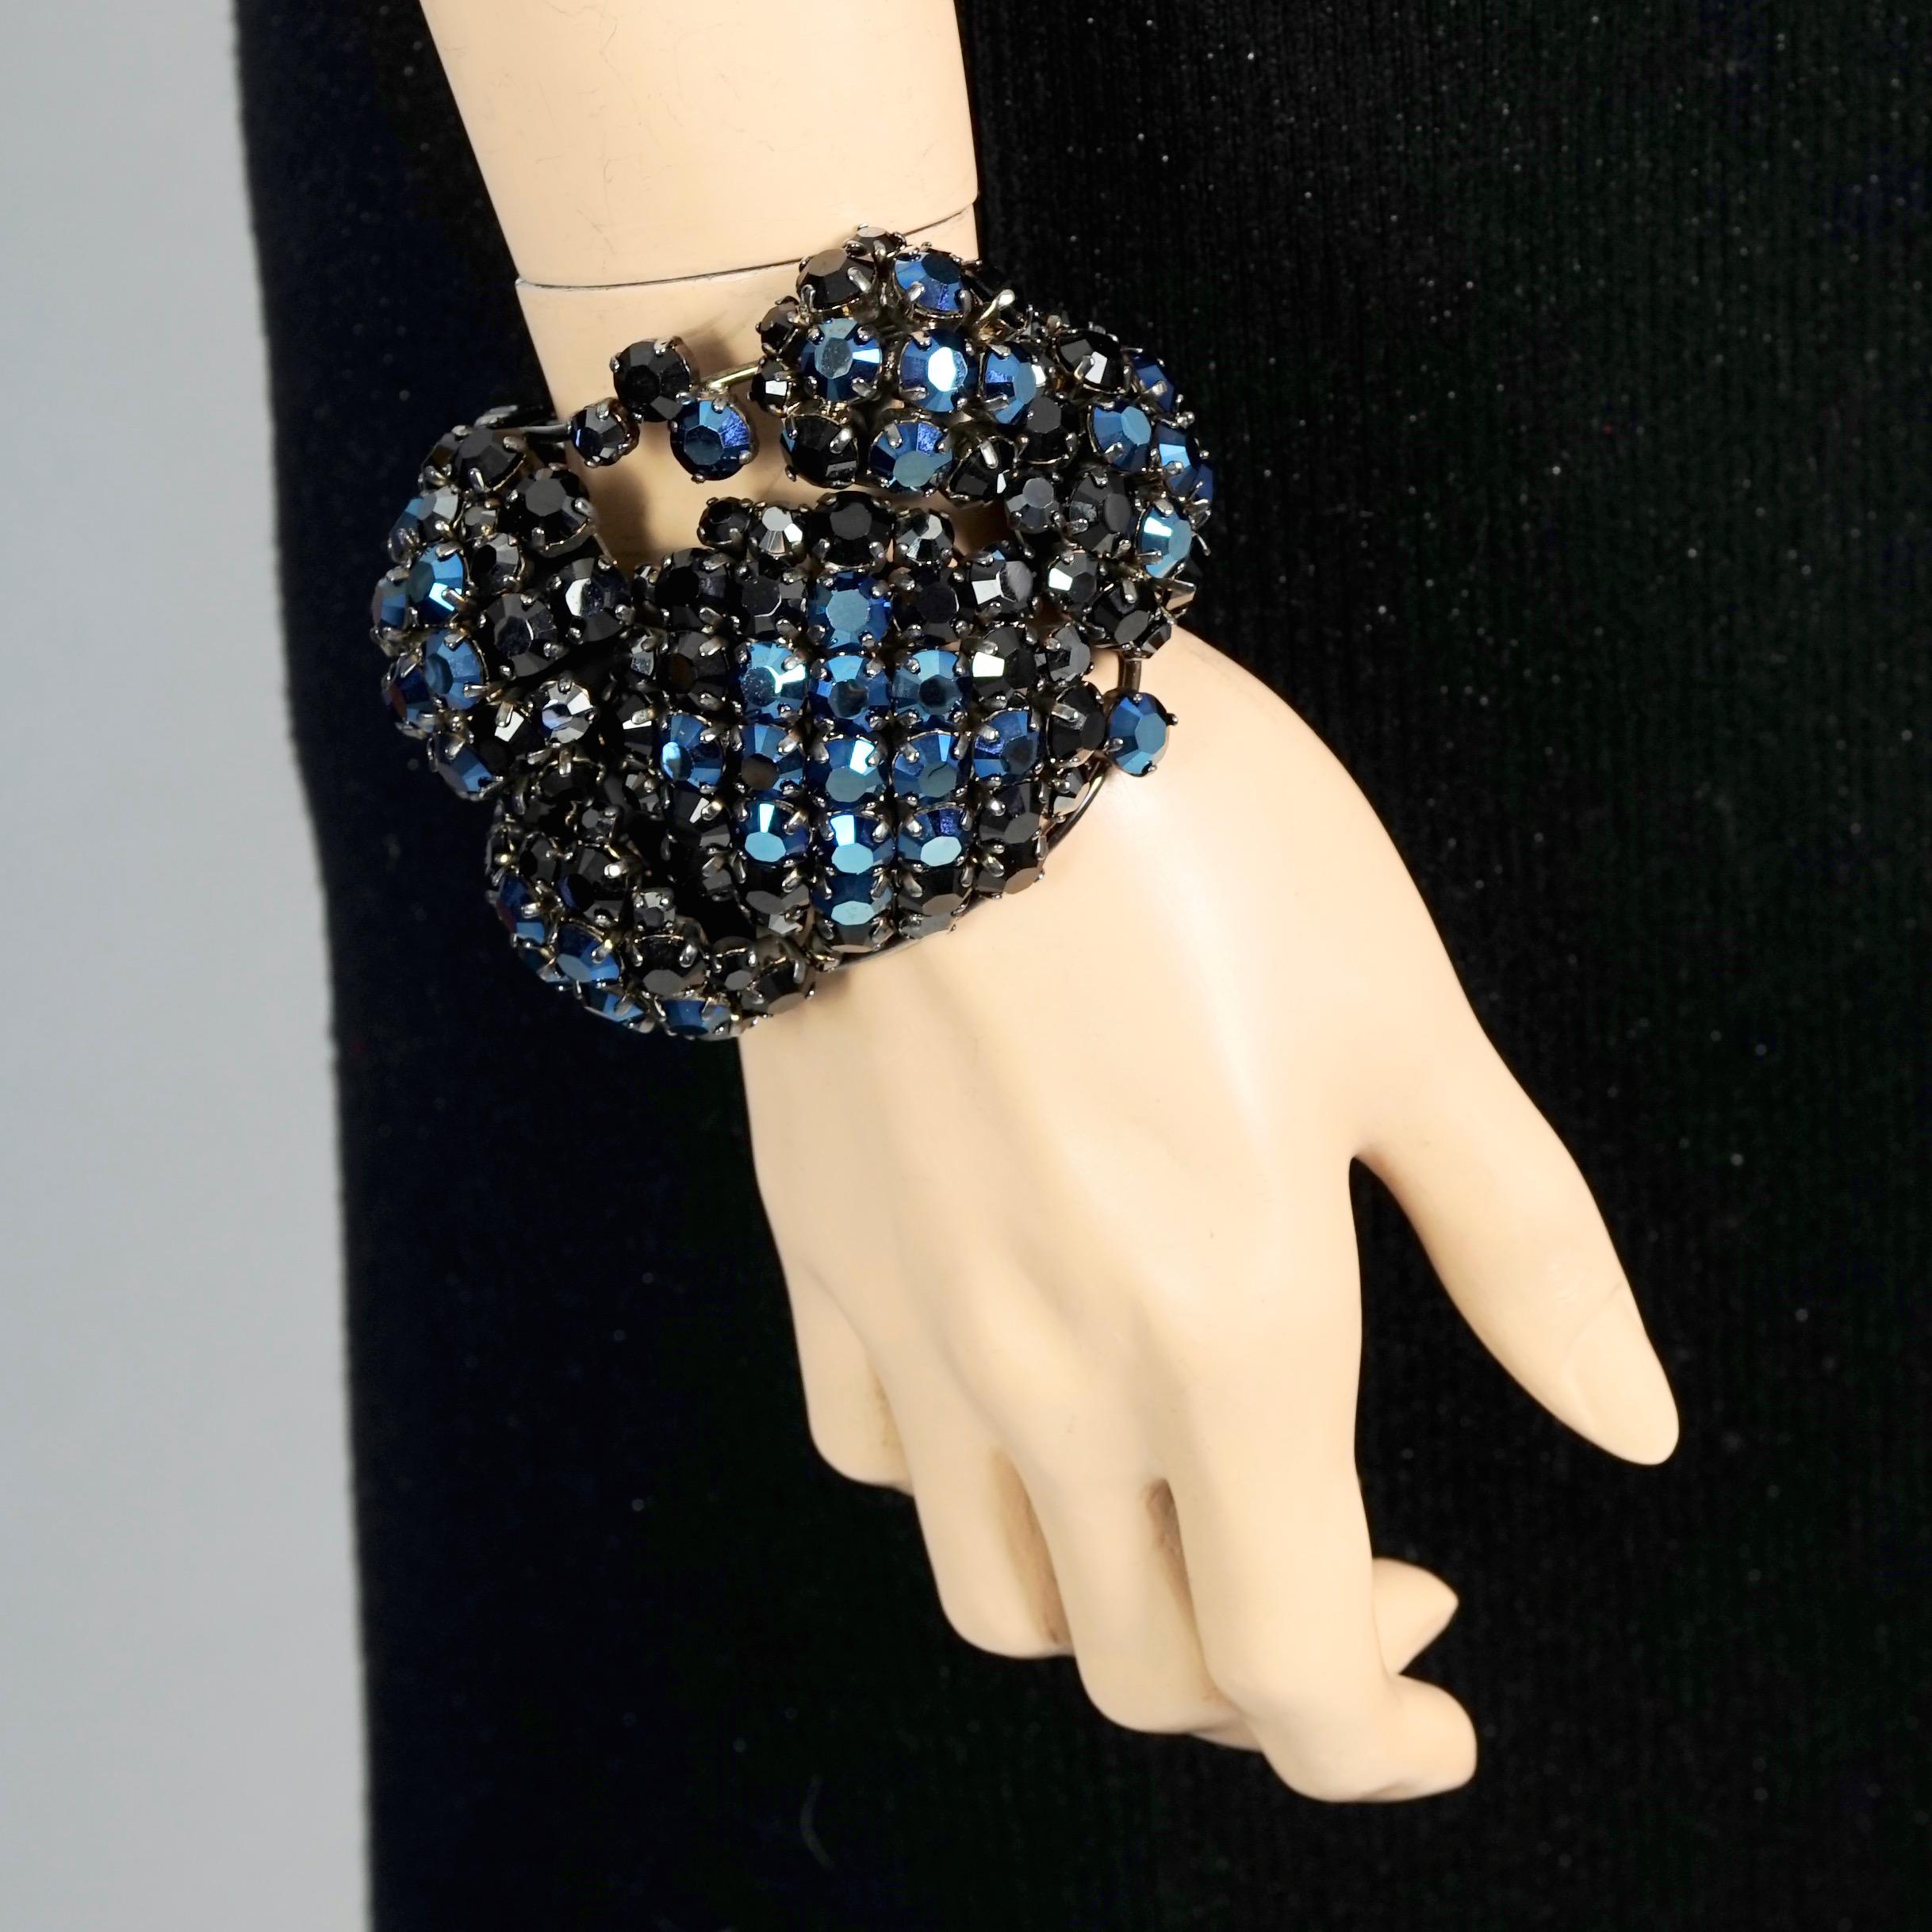 Vintage PHILIPPE FERRANDIS Dramatic Crystal Wide Cuff Bracelet

Measurements:
Height: 2.75 inches (7 cm)
Wearable Length: 6.89 inches (17.5 cm) opening included

Features:
- 100% Authentic PHILIPPE FERRANDIS.
- Dramatic cuff bracelet studded with